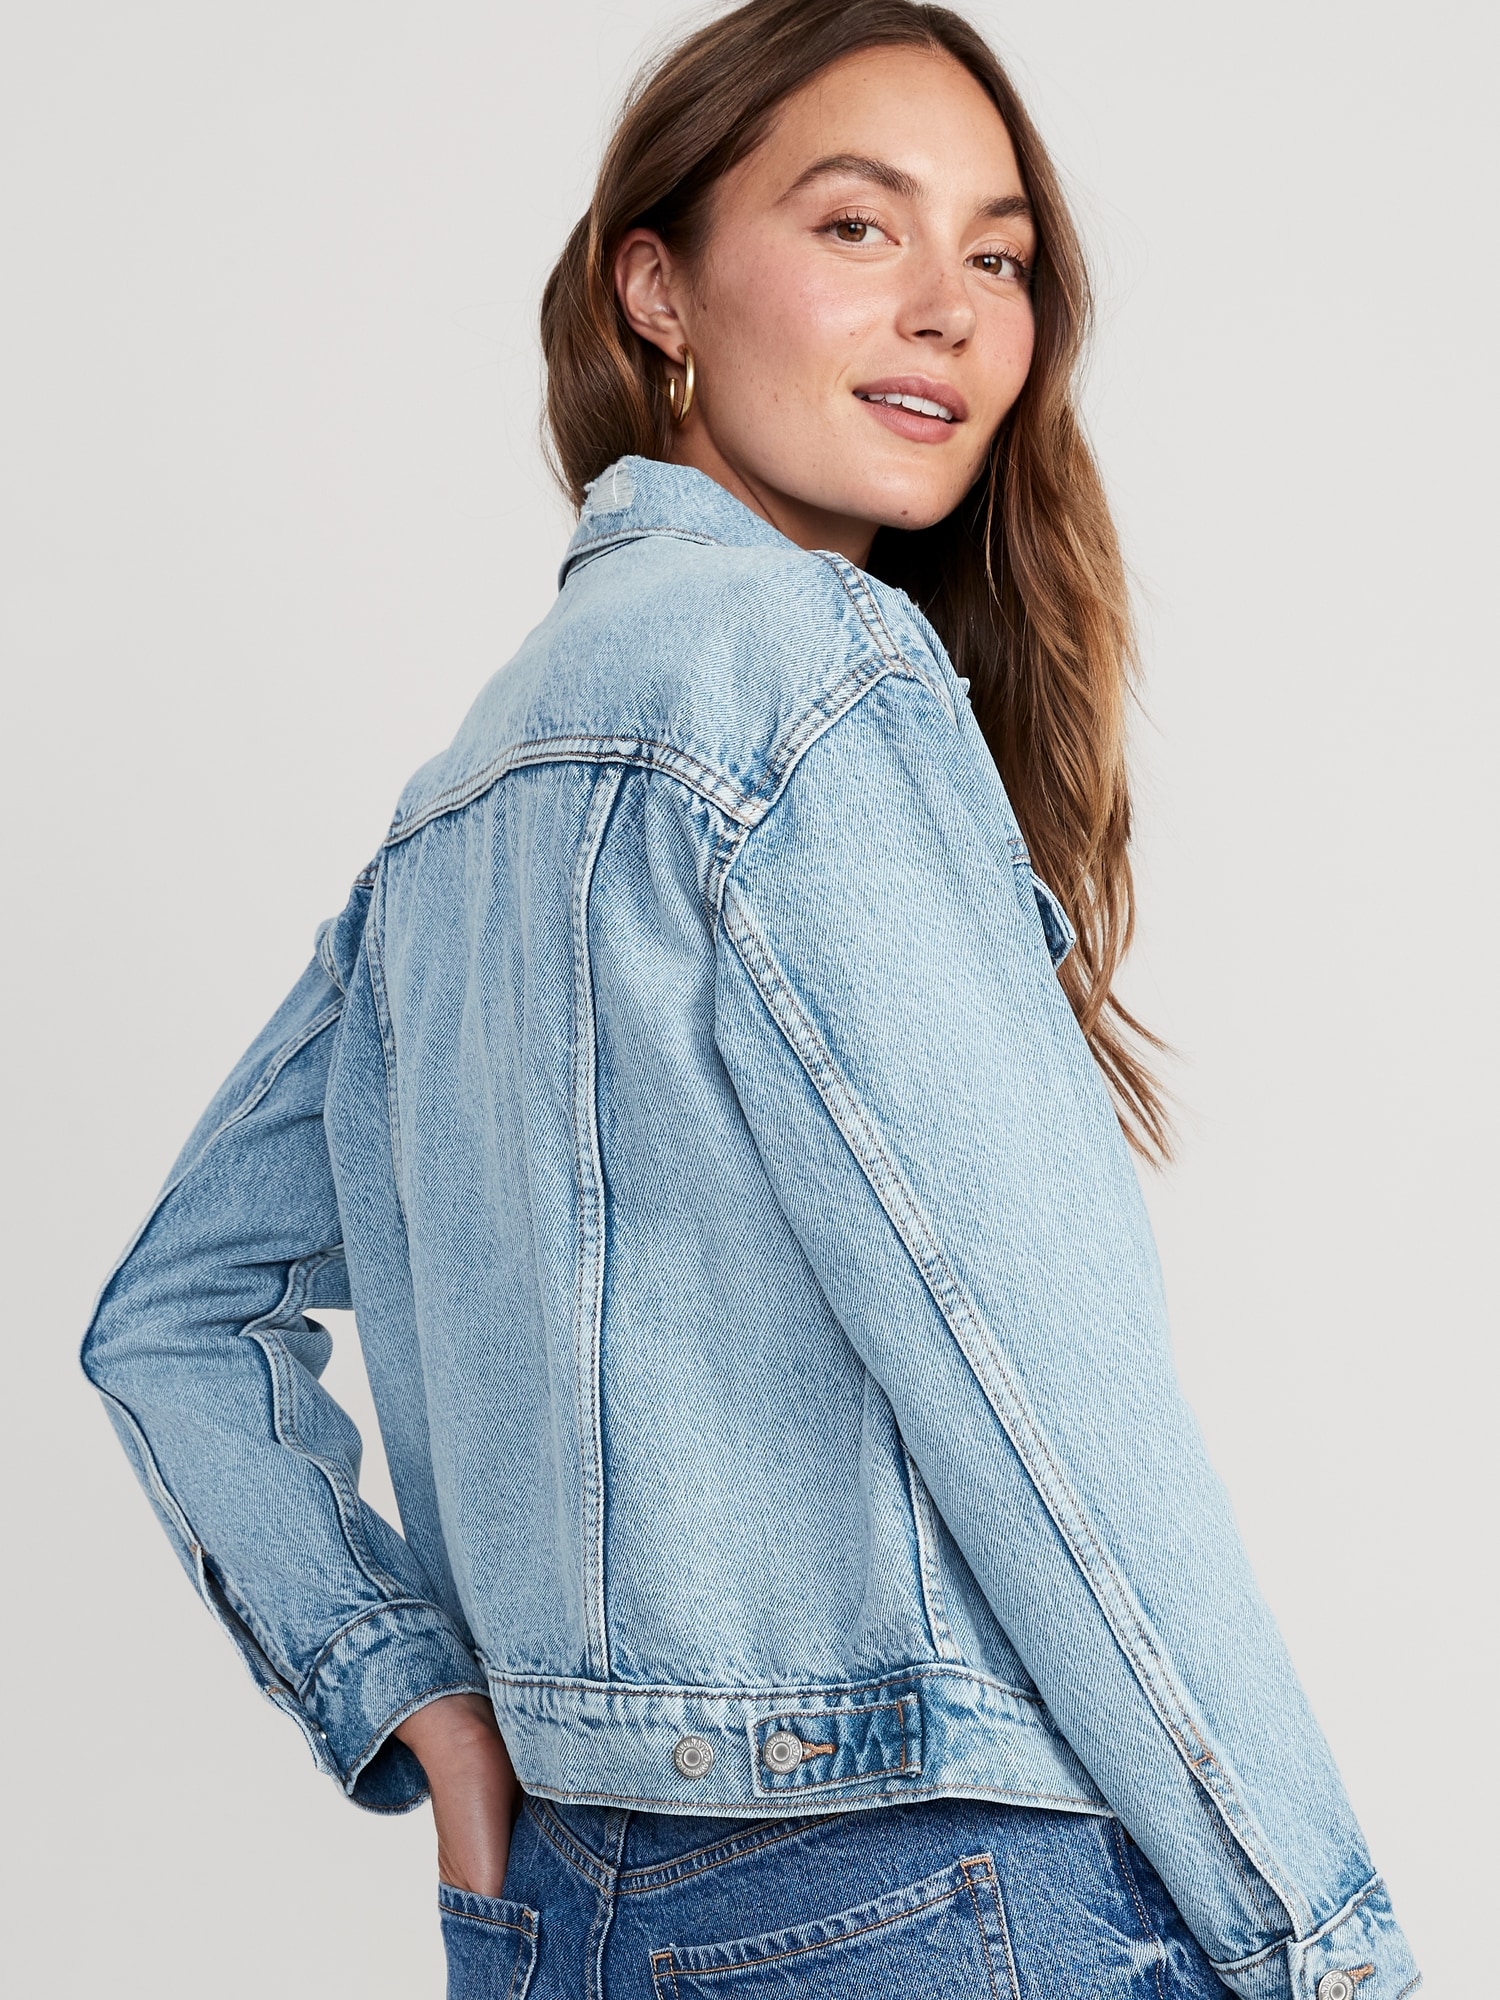 Classic Jean Jacket for Women | Old Navy